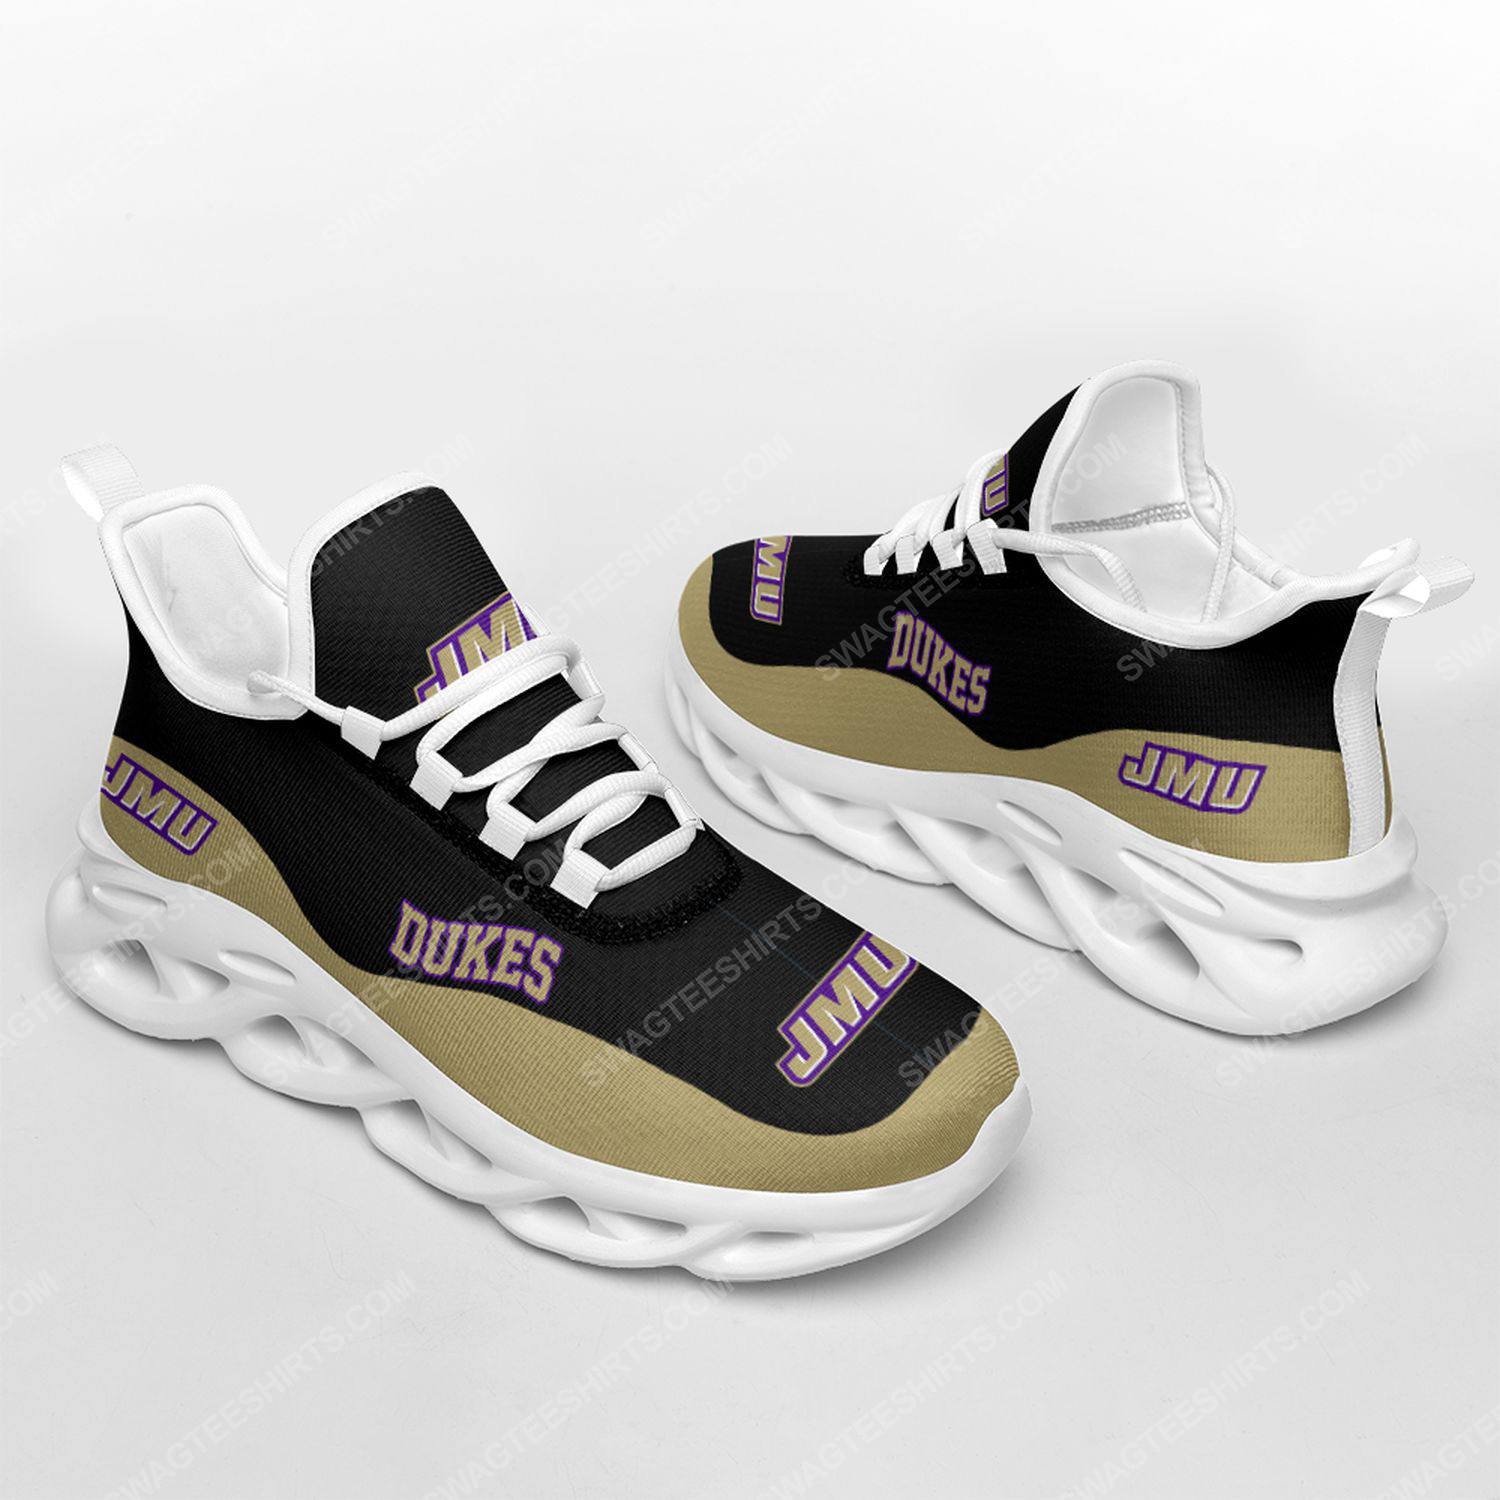 [special edition] The james madison dukes football team max soul shoes – Maria